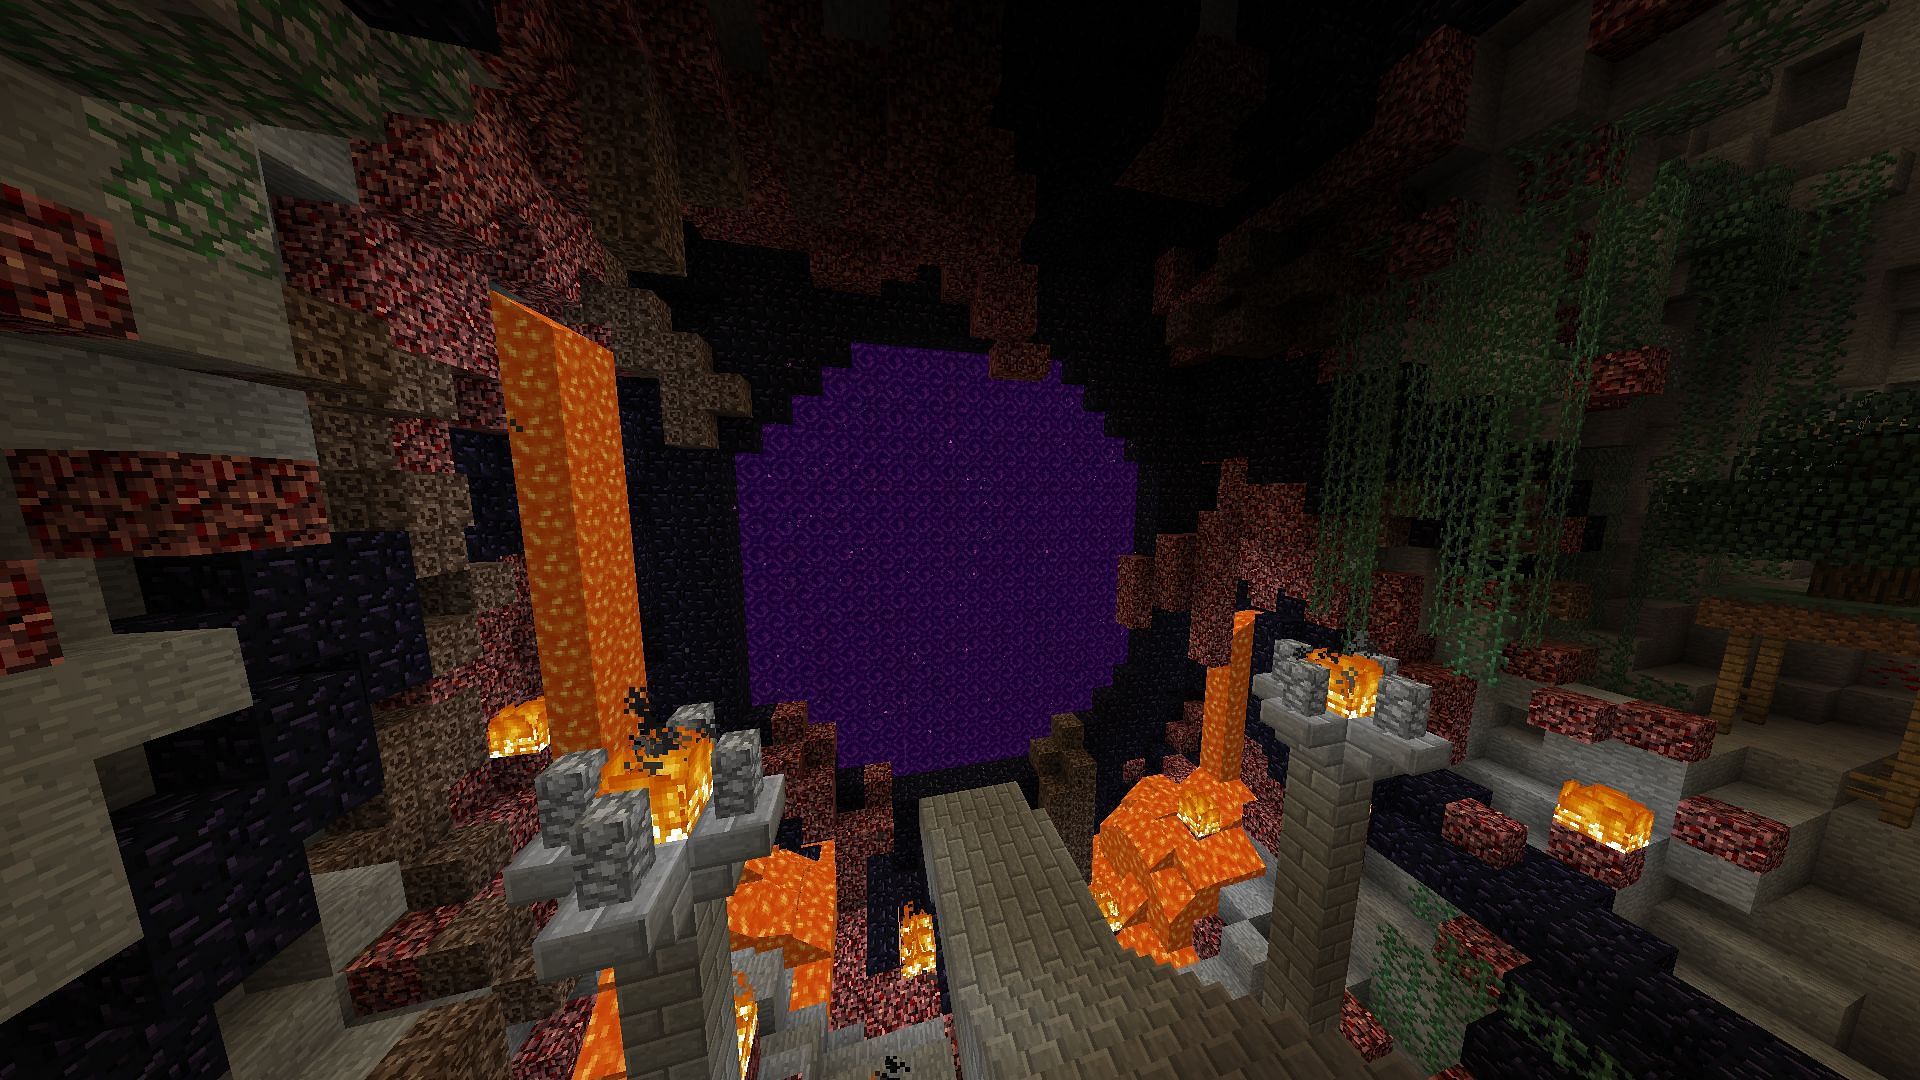 An example of an infected Nether portal (Image via Reddit)